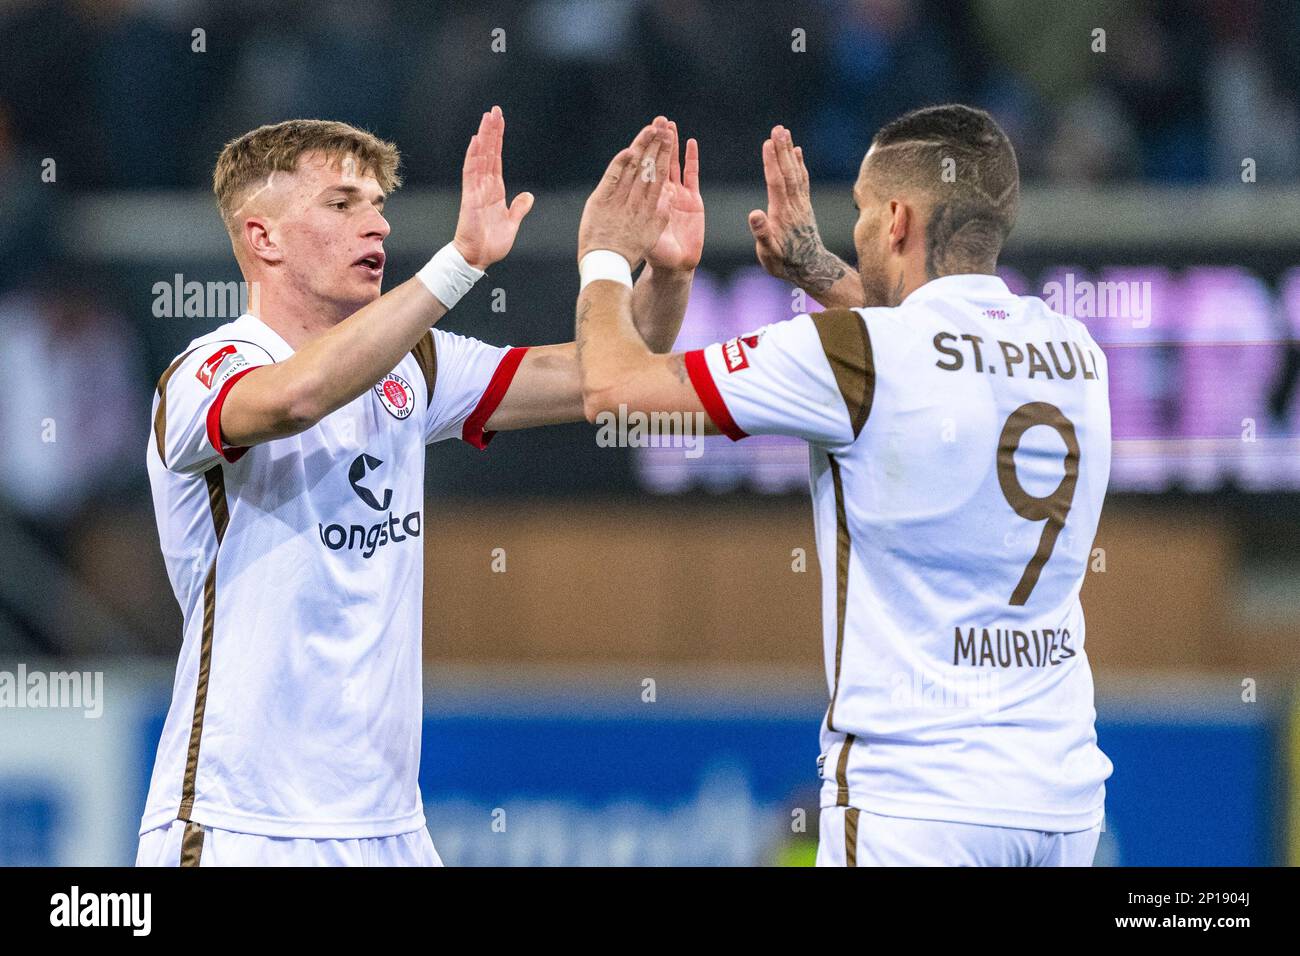 Paderborn, Germany. 03rd Mar, 2023. Soccer: 2. Bundesliga, SC Paderborn 07  - FC St. Pauli, Matchday 23, Home Deluxe Arena: St. Pauli's David Otto (l)  and St. Pauli's Maurides are happy after